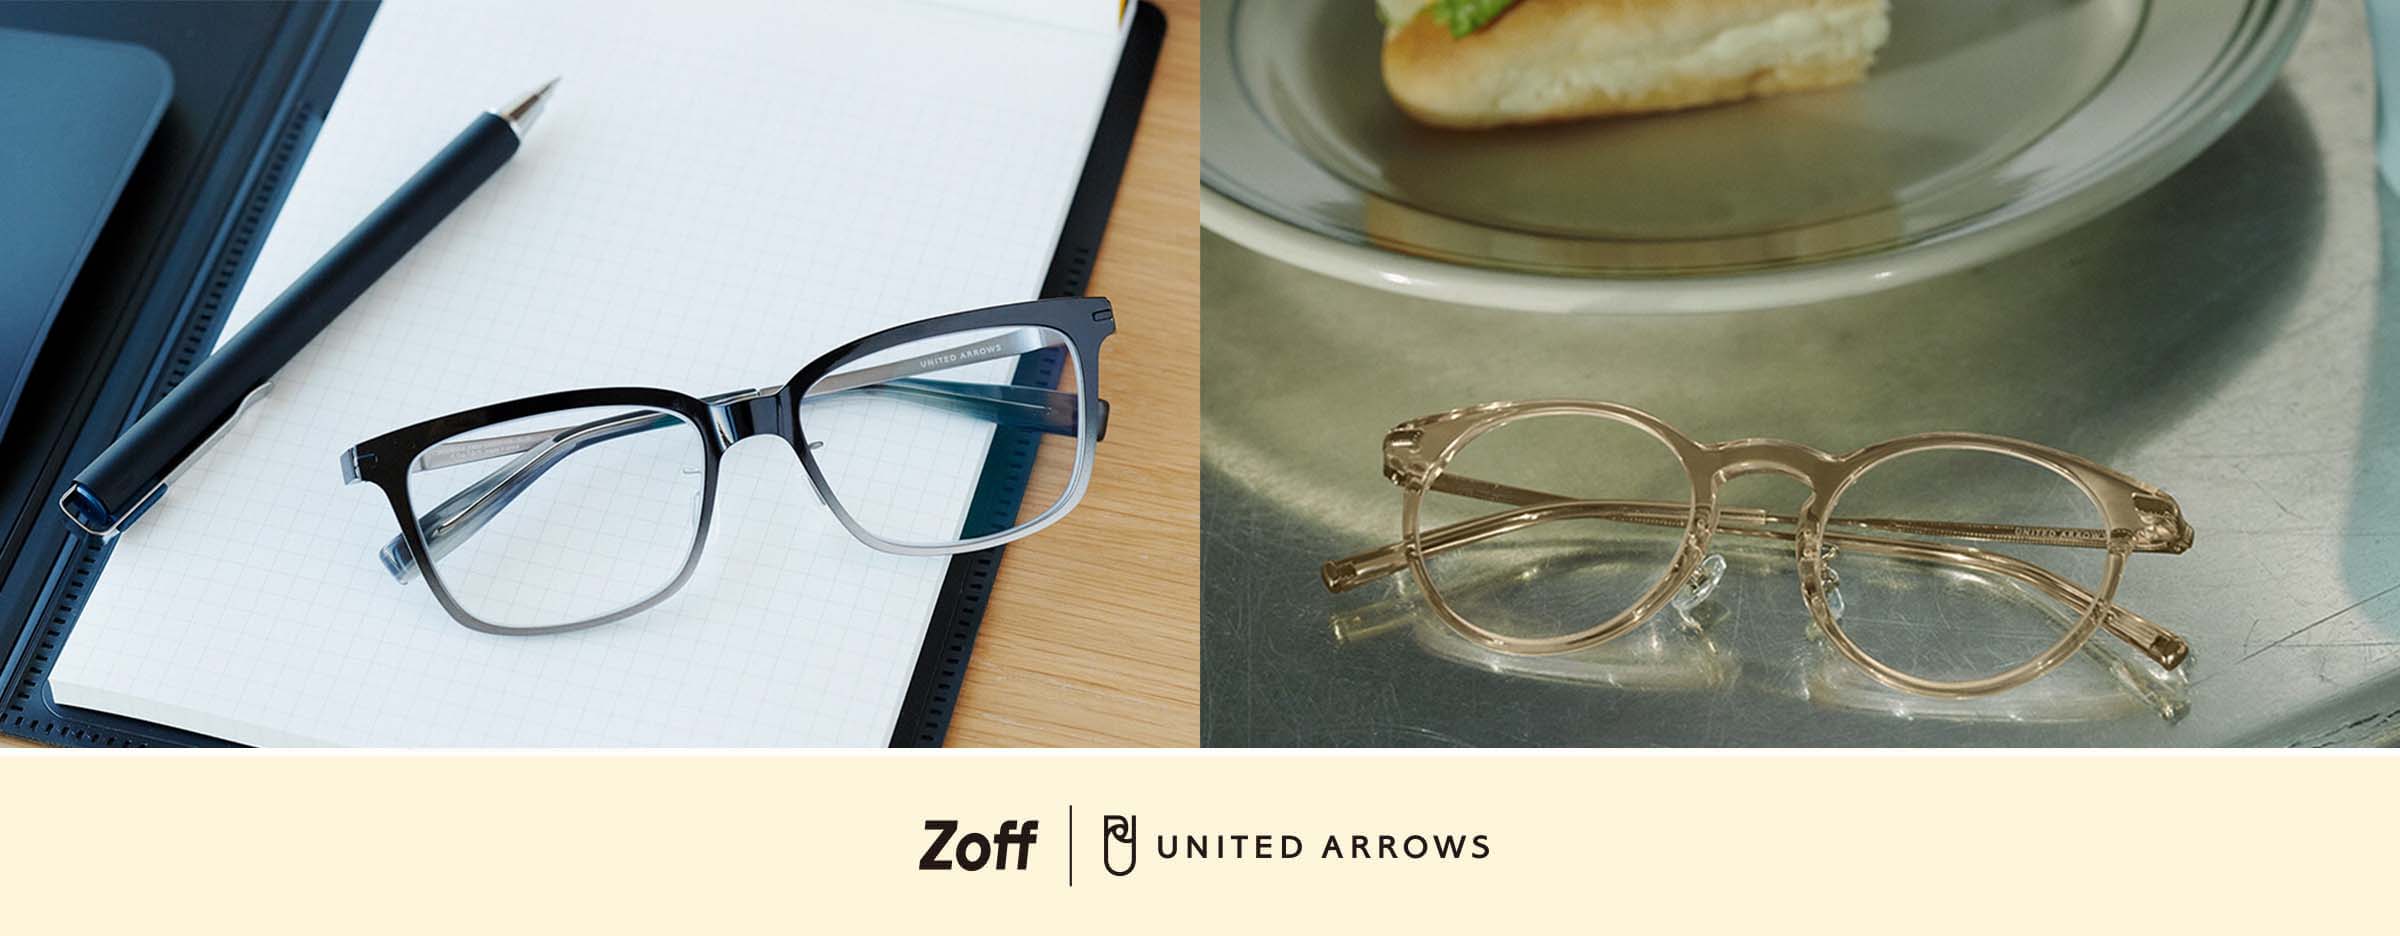 MEET THE NEW ME - Zoff | United Arrows